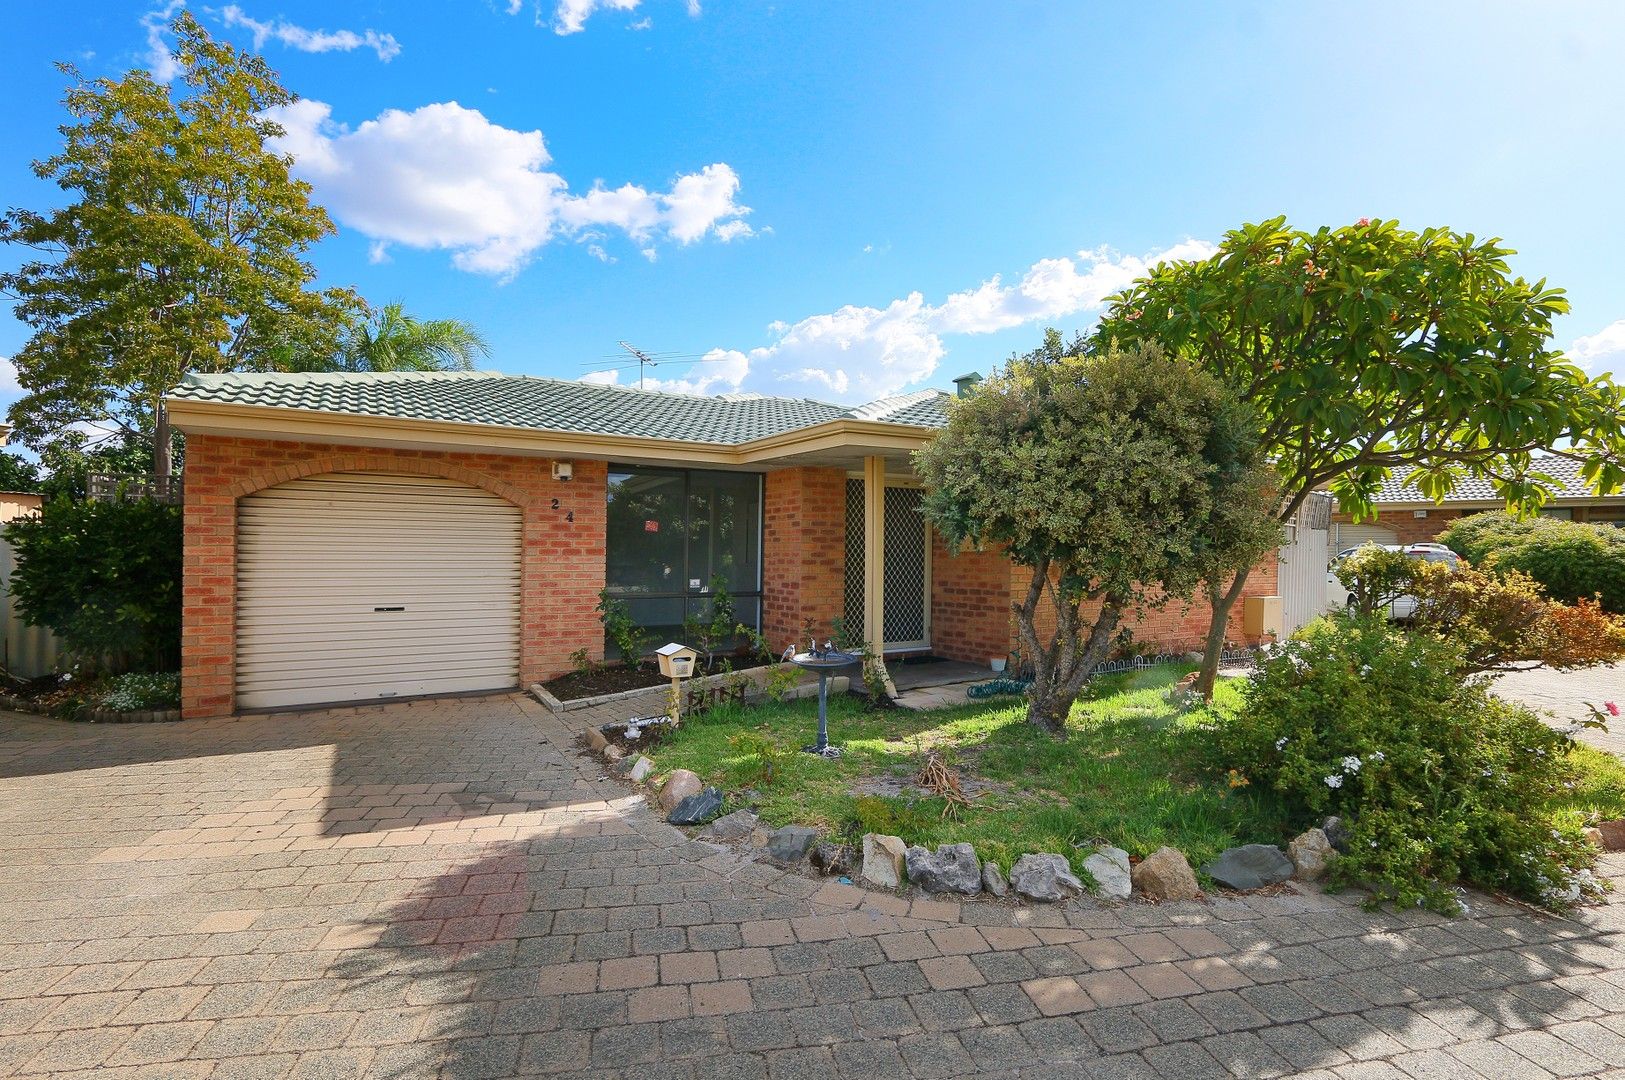 3 bedrooms House in 5/24 Dealy Close CANNINGTON WA, 6107